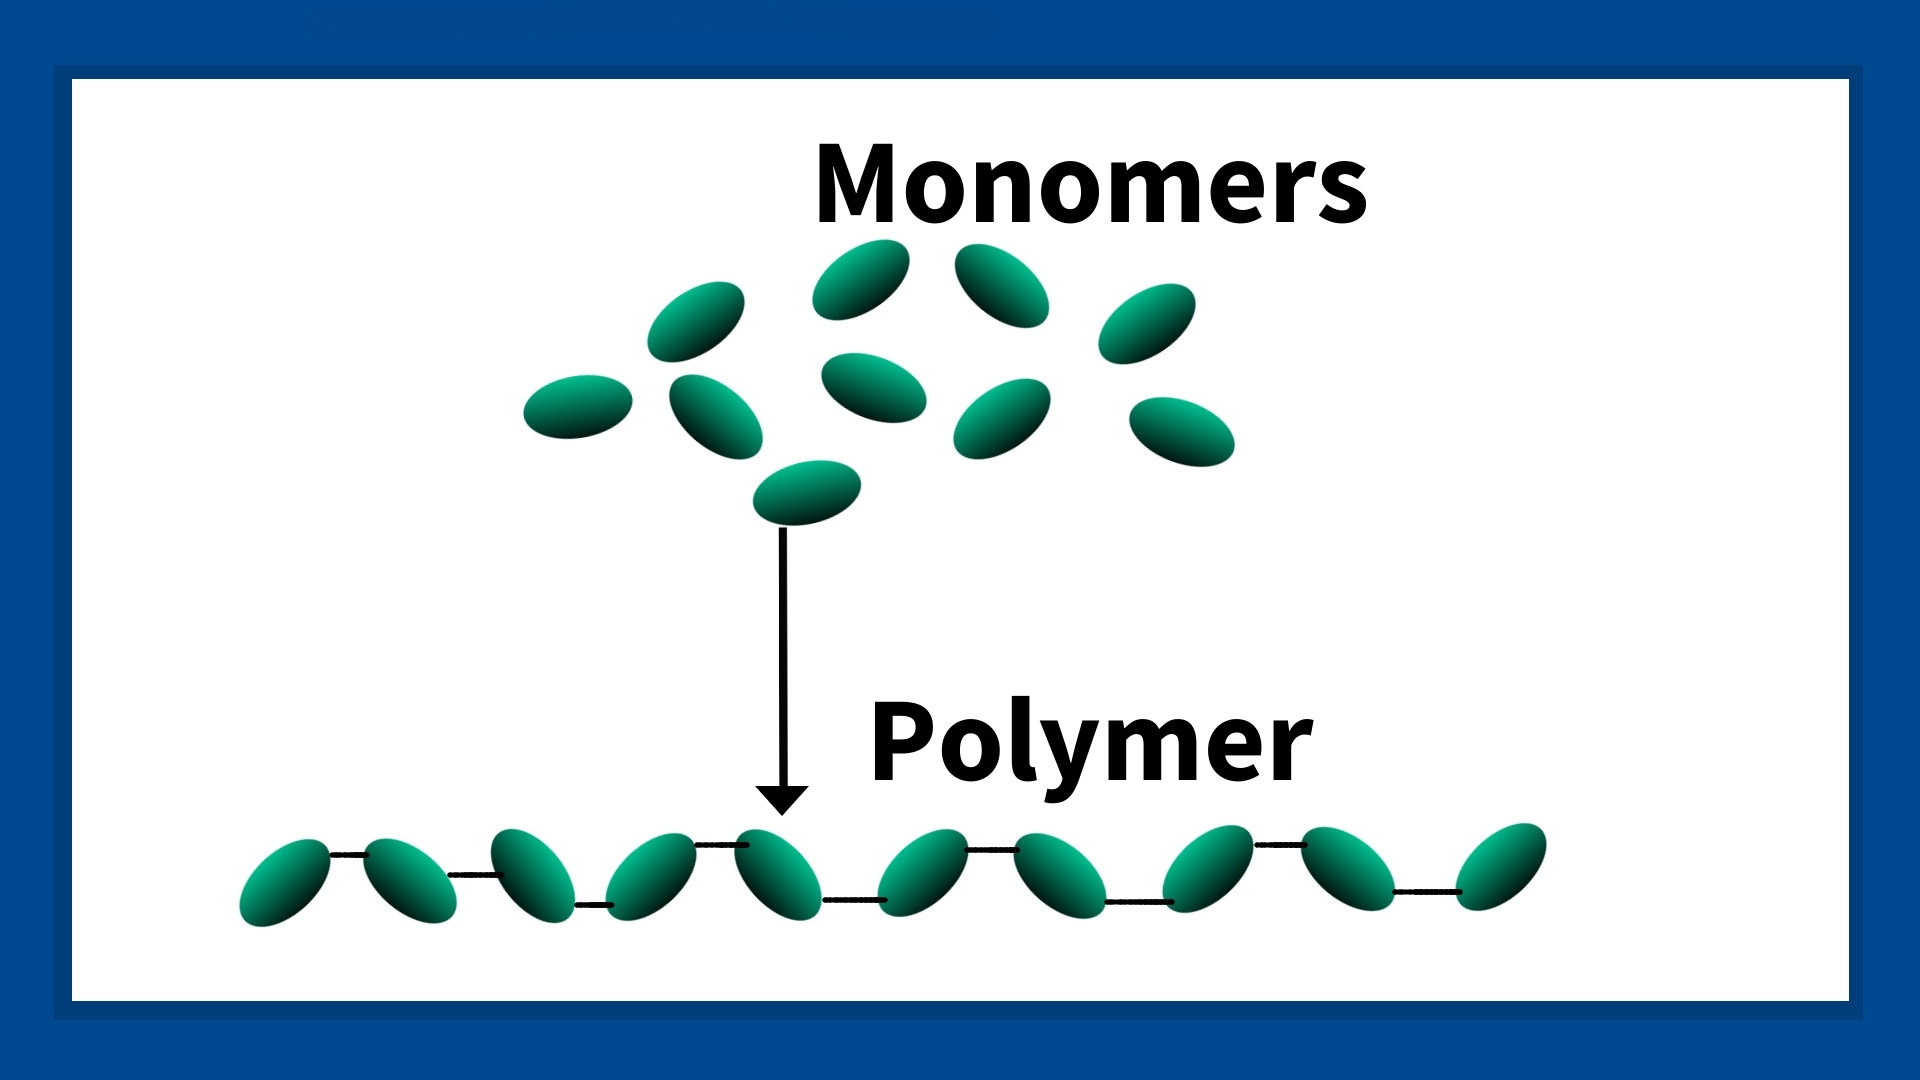 This image shows how many monomer molecules will come together to create a polymer chain.